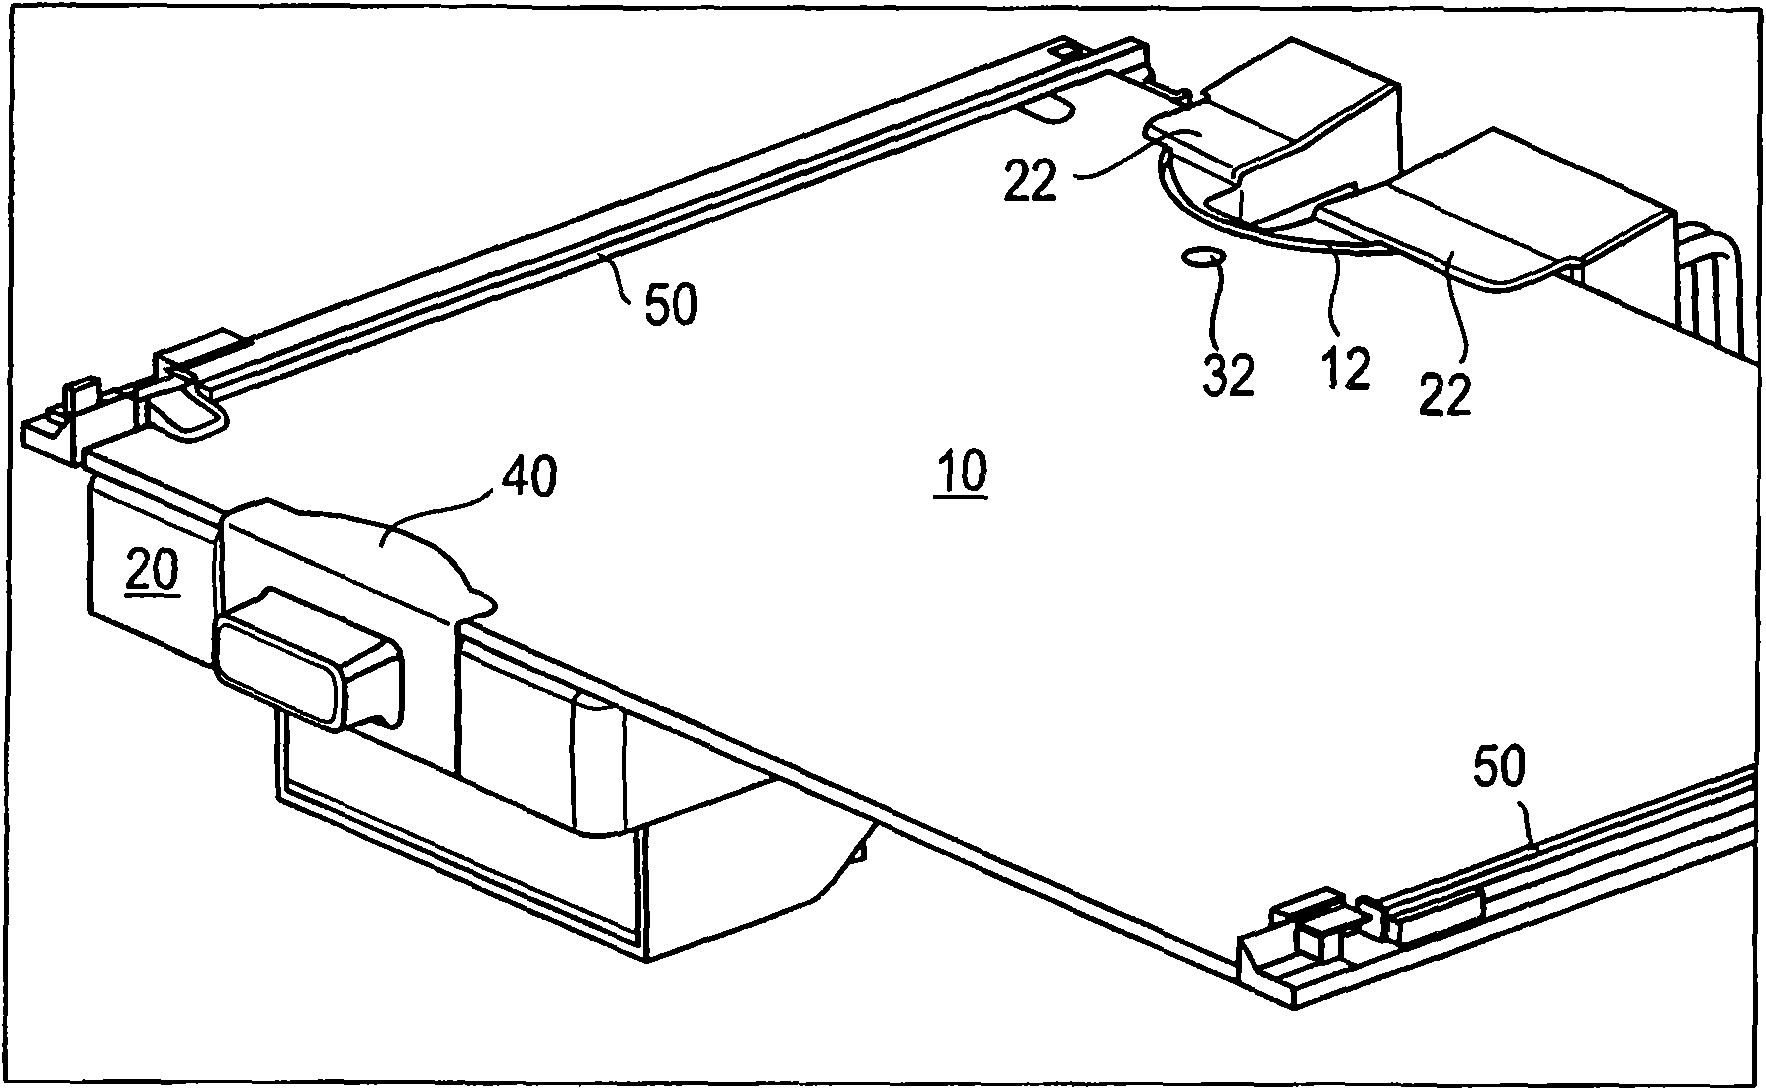 Shelf, and refrigerator and/or freezer comprising at least one shelf